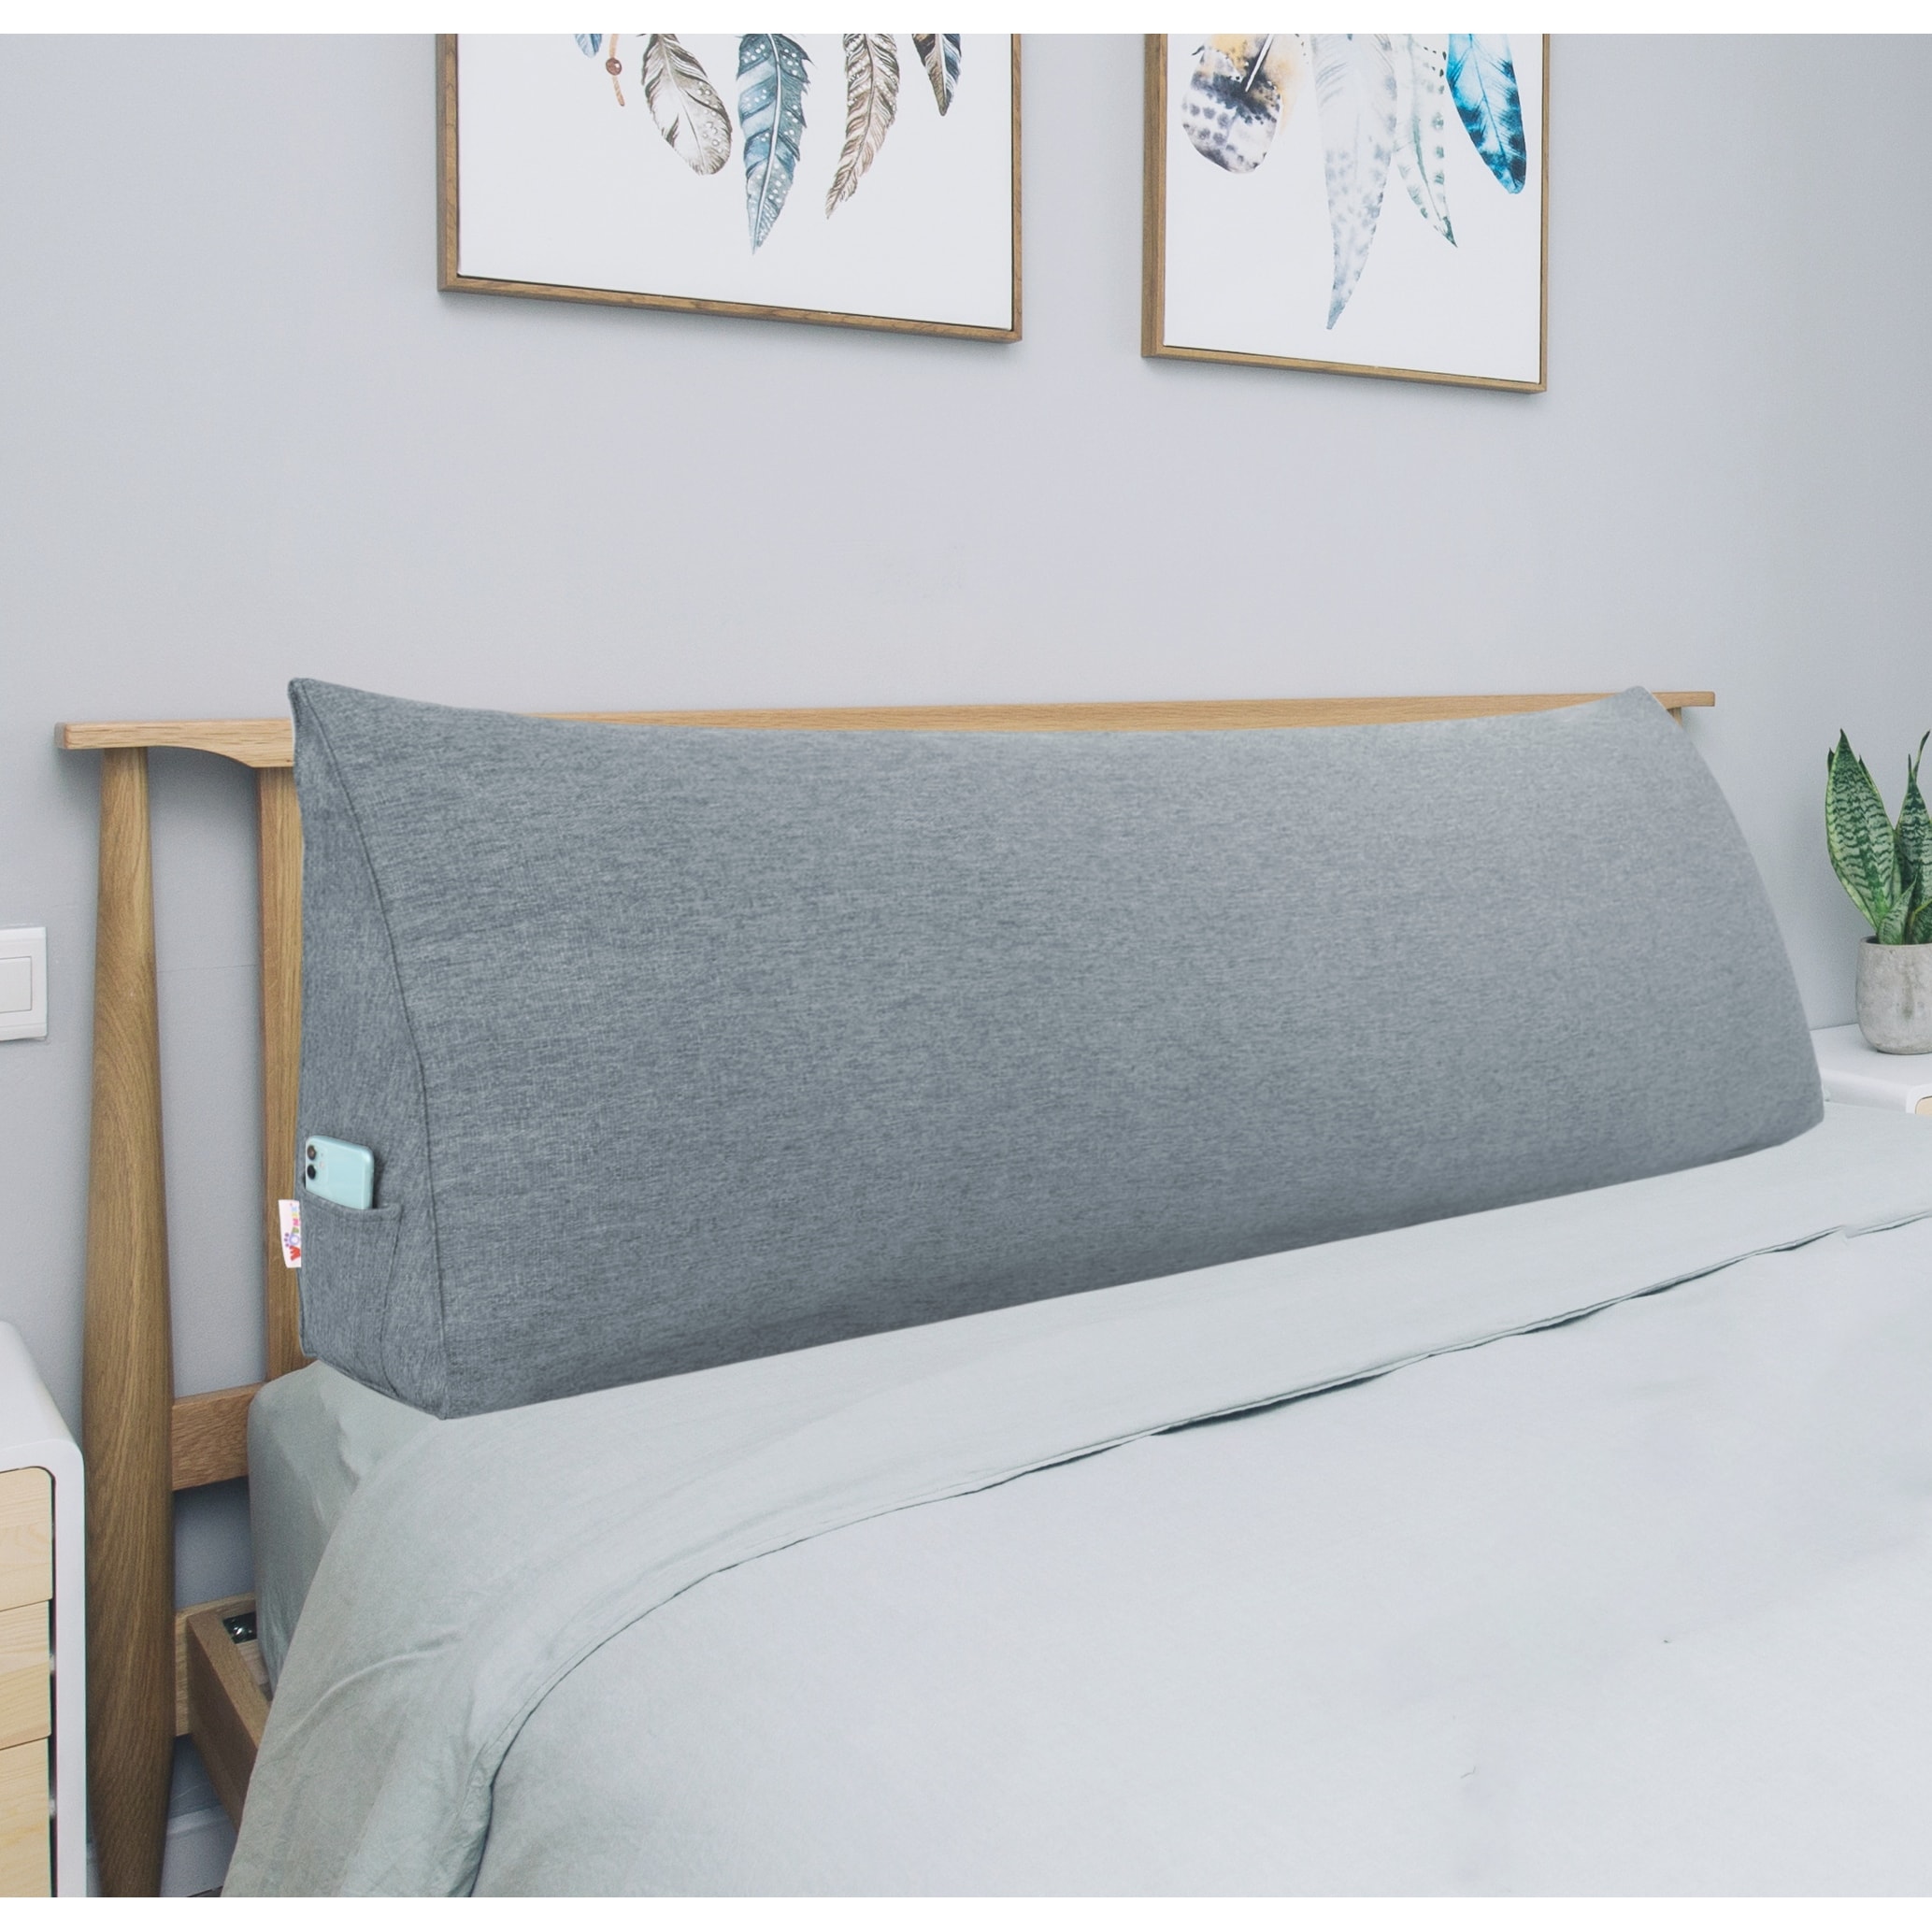 https://ak1.ostkcdn.com/images/products/is/images/direct/cd0b4119c661cfcfd2e8712a05430a01e8419c45/Bed-Rest-Reading-Wedge-Pillow-Adjustable-Headboard-Back-Support.jpg